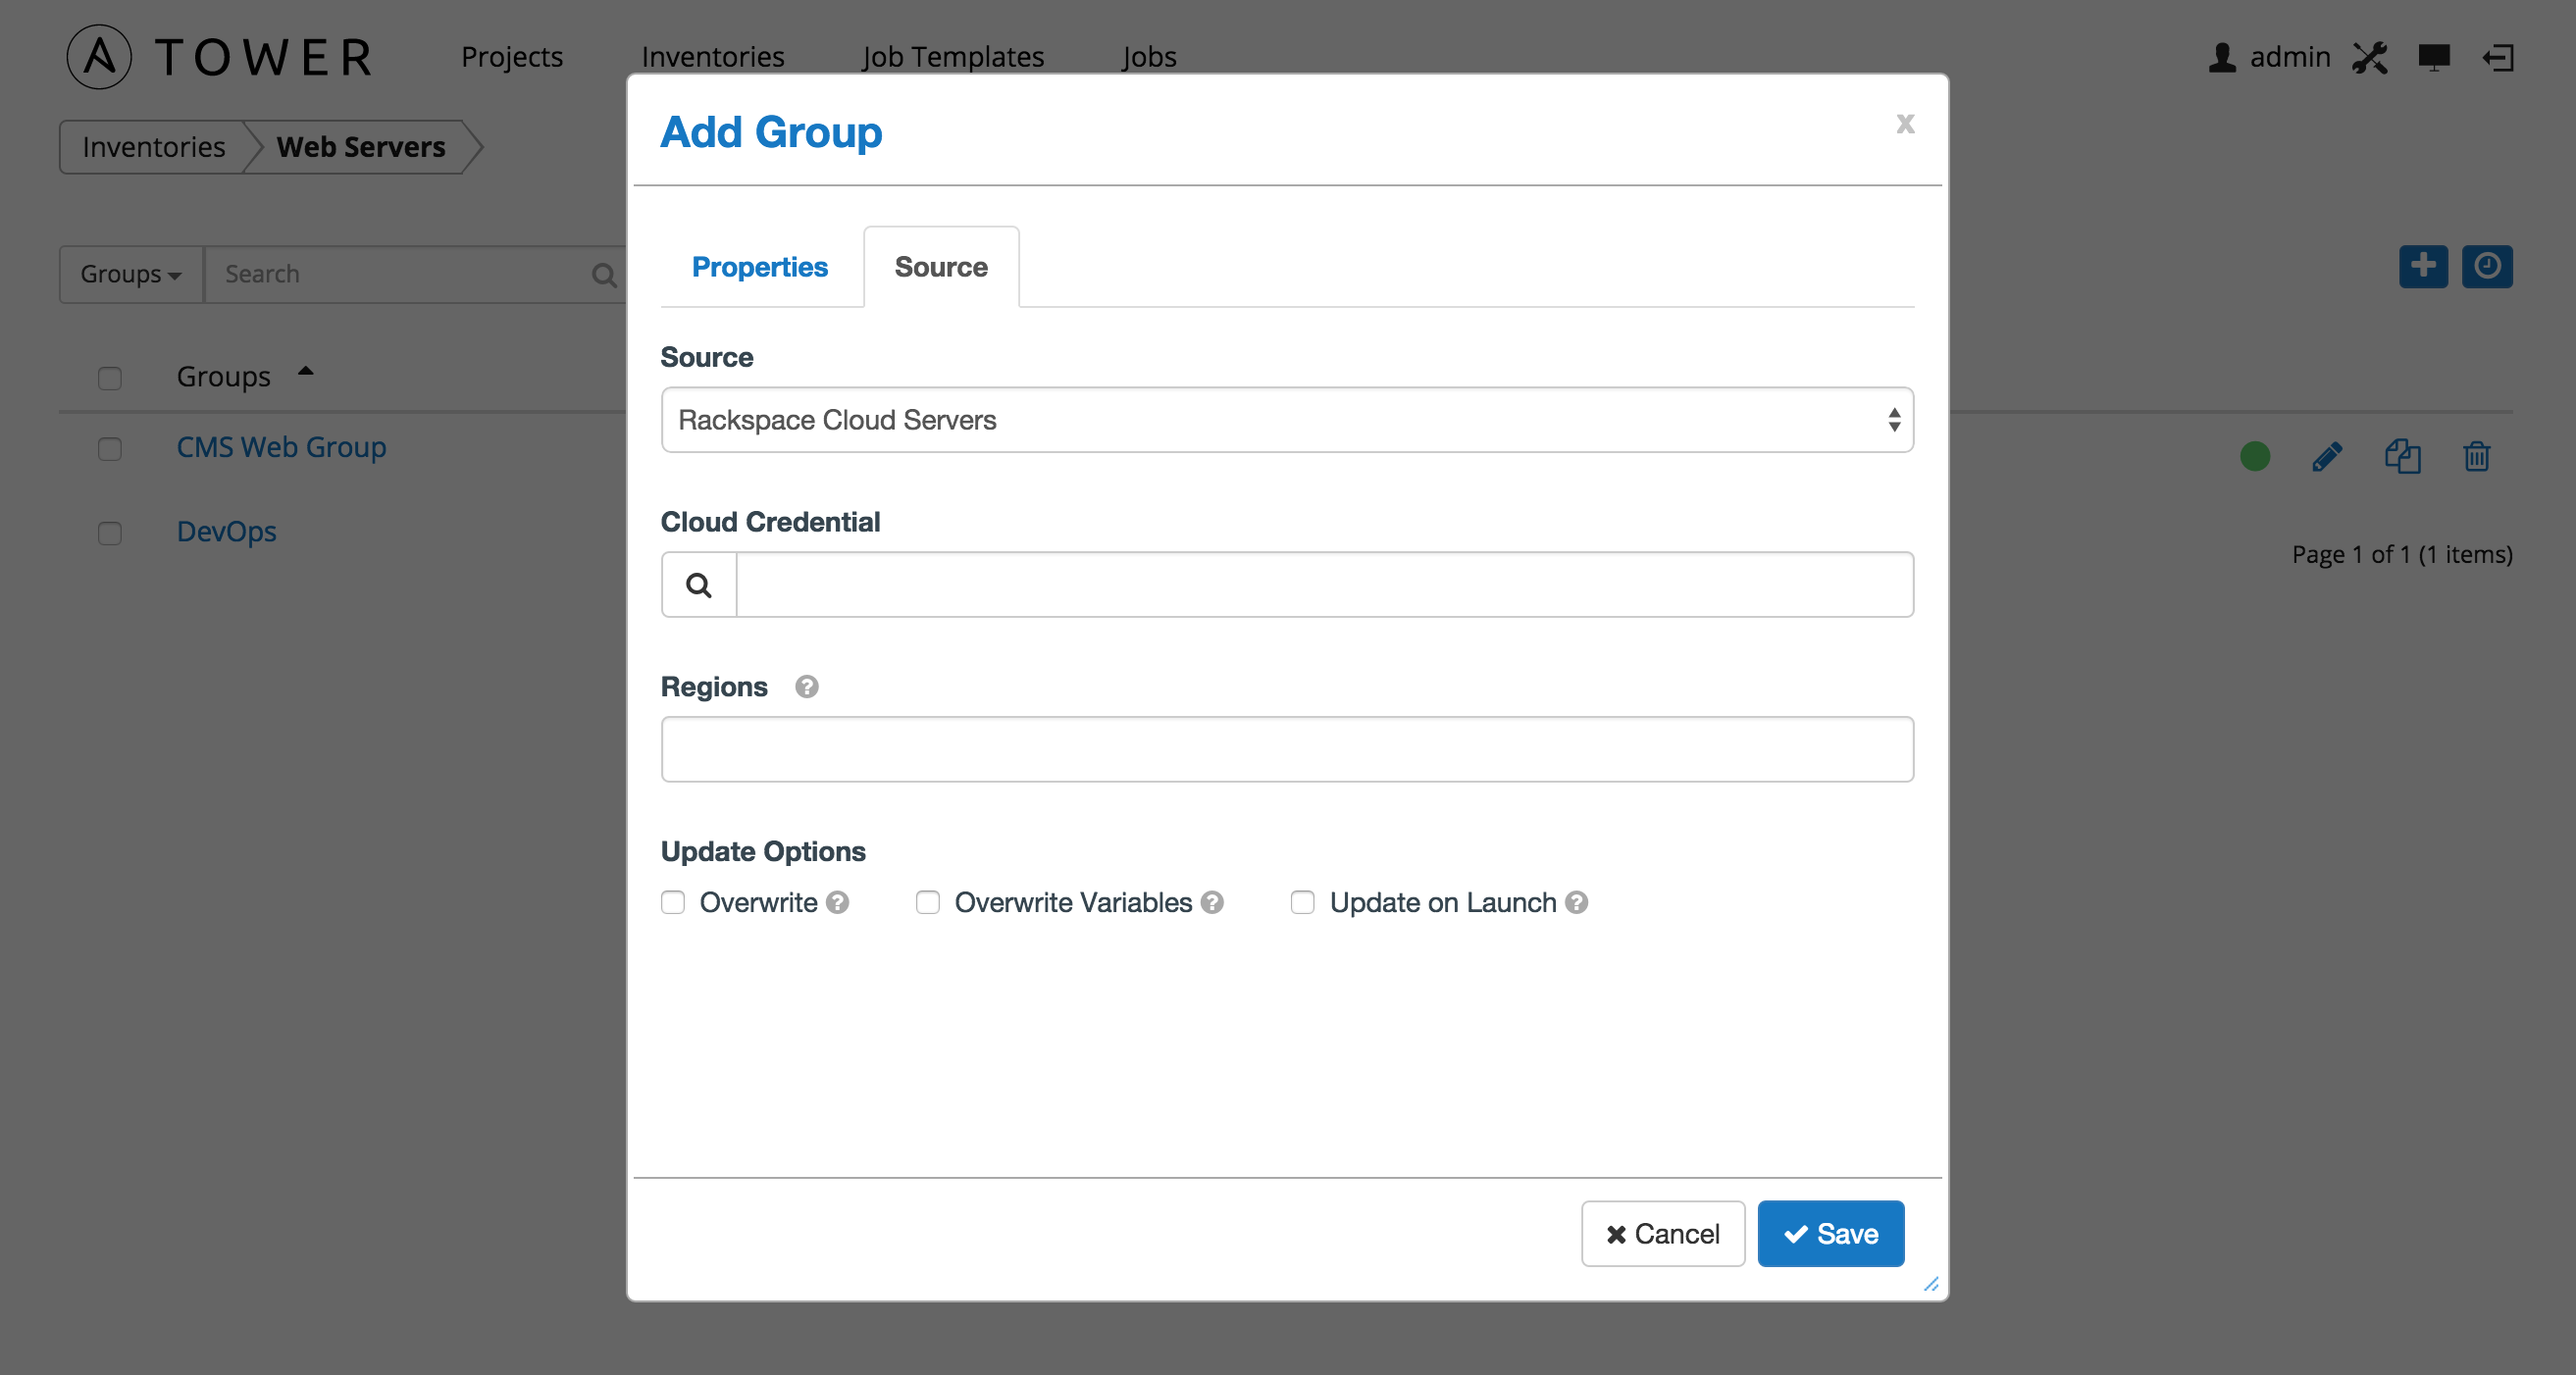 Inventories - create Rackspace group for example inventory